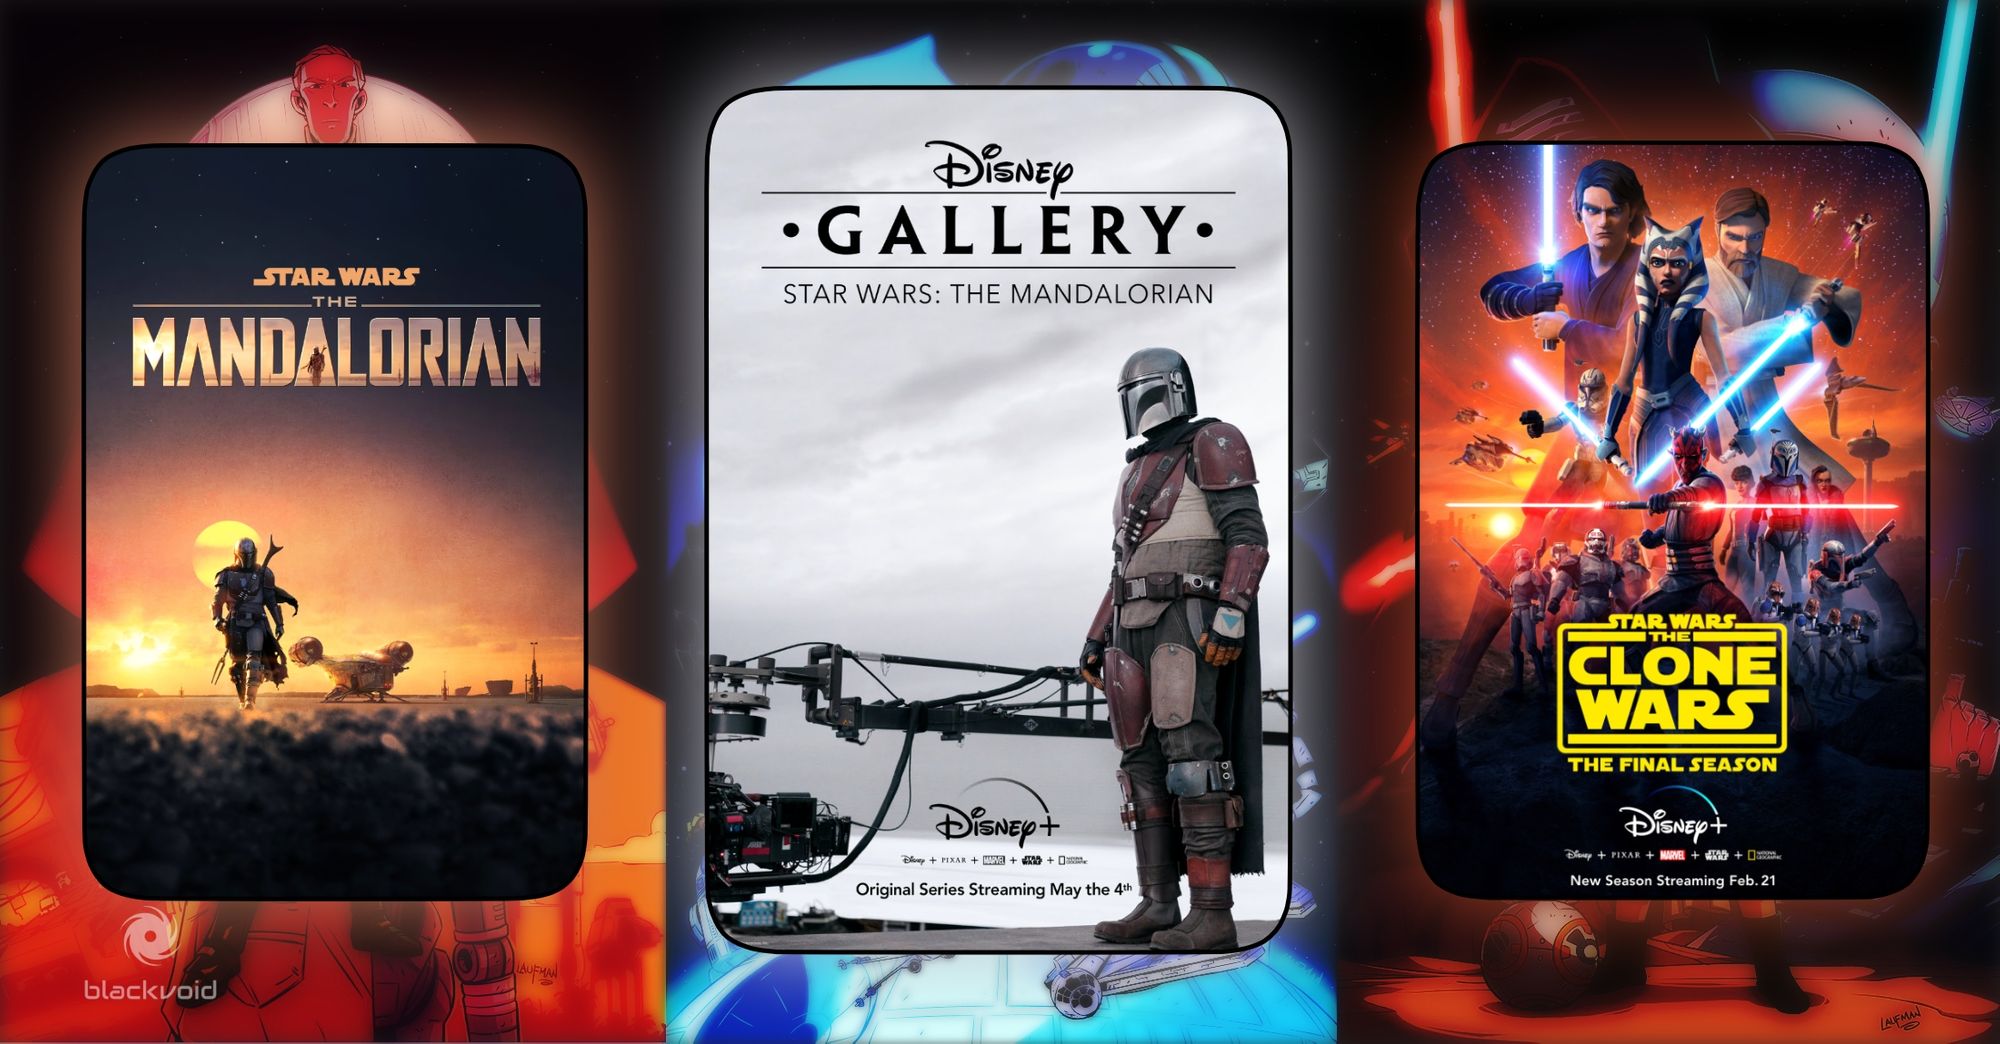 Disney is going all out with Star Wars TV shows